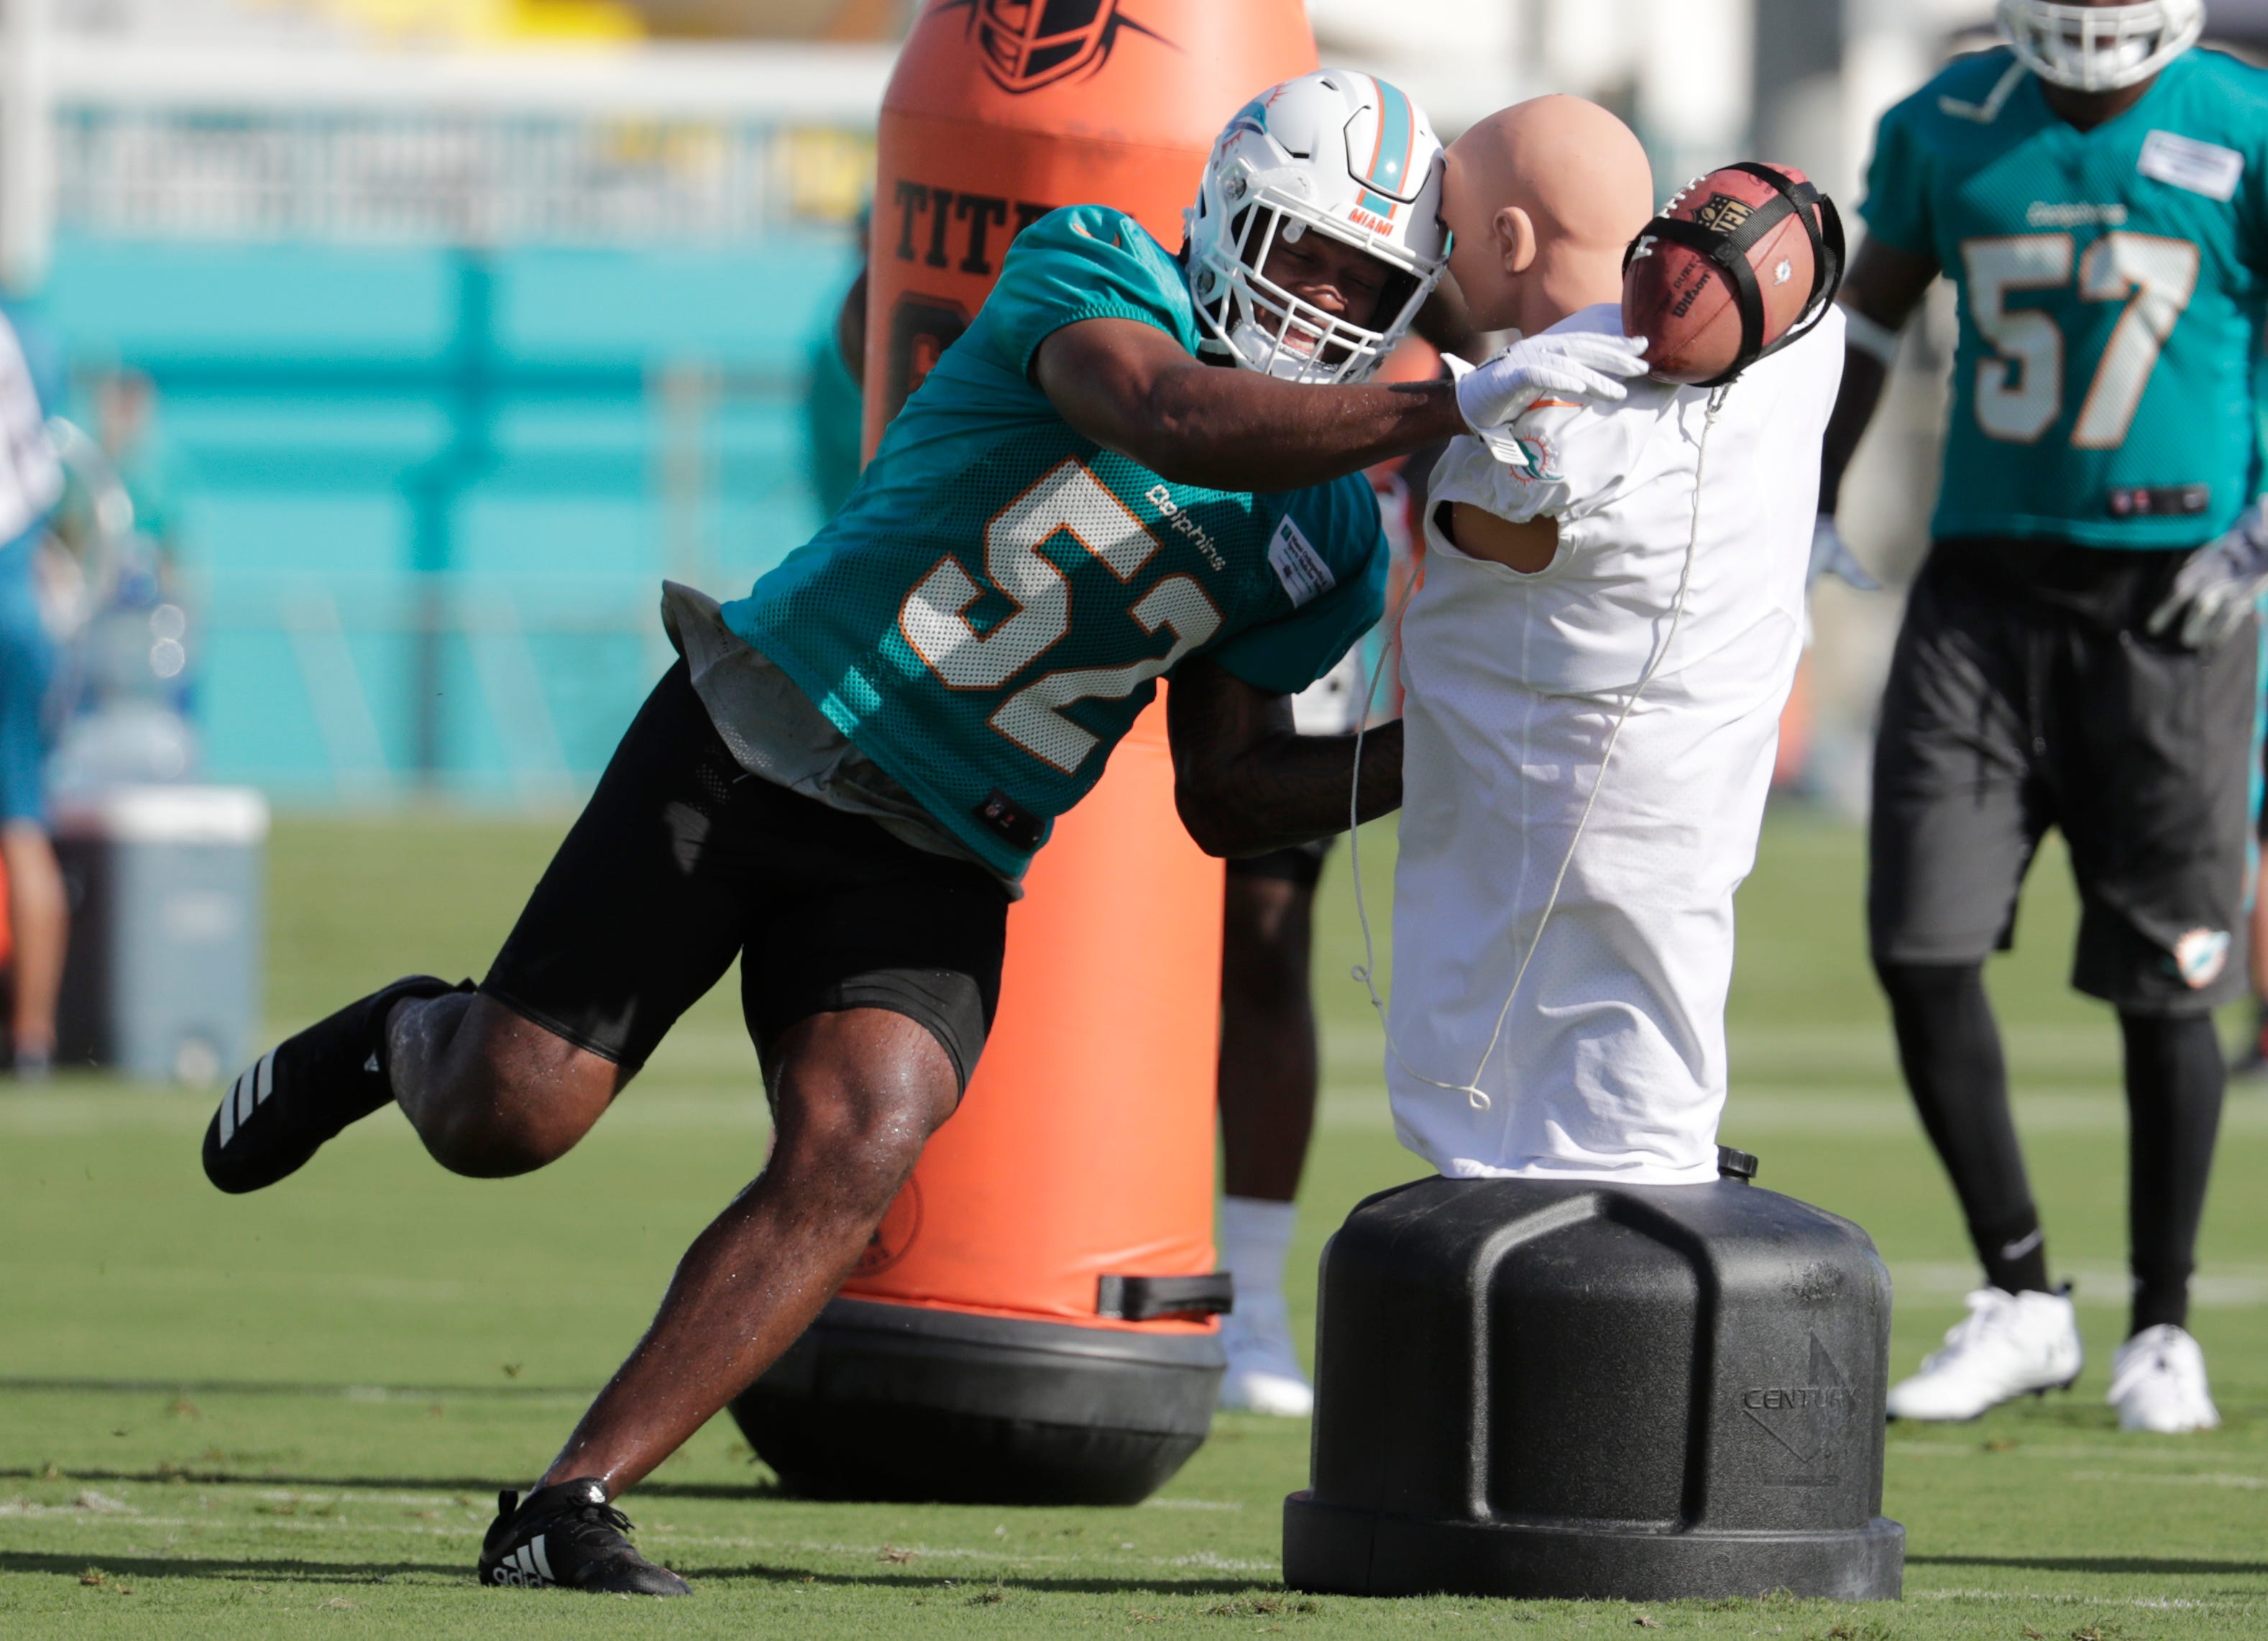 Back from knee injury, Dolphins' McMillan ready for contact